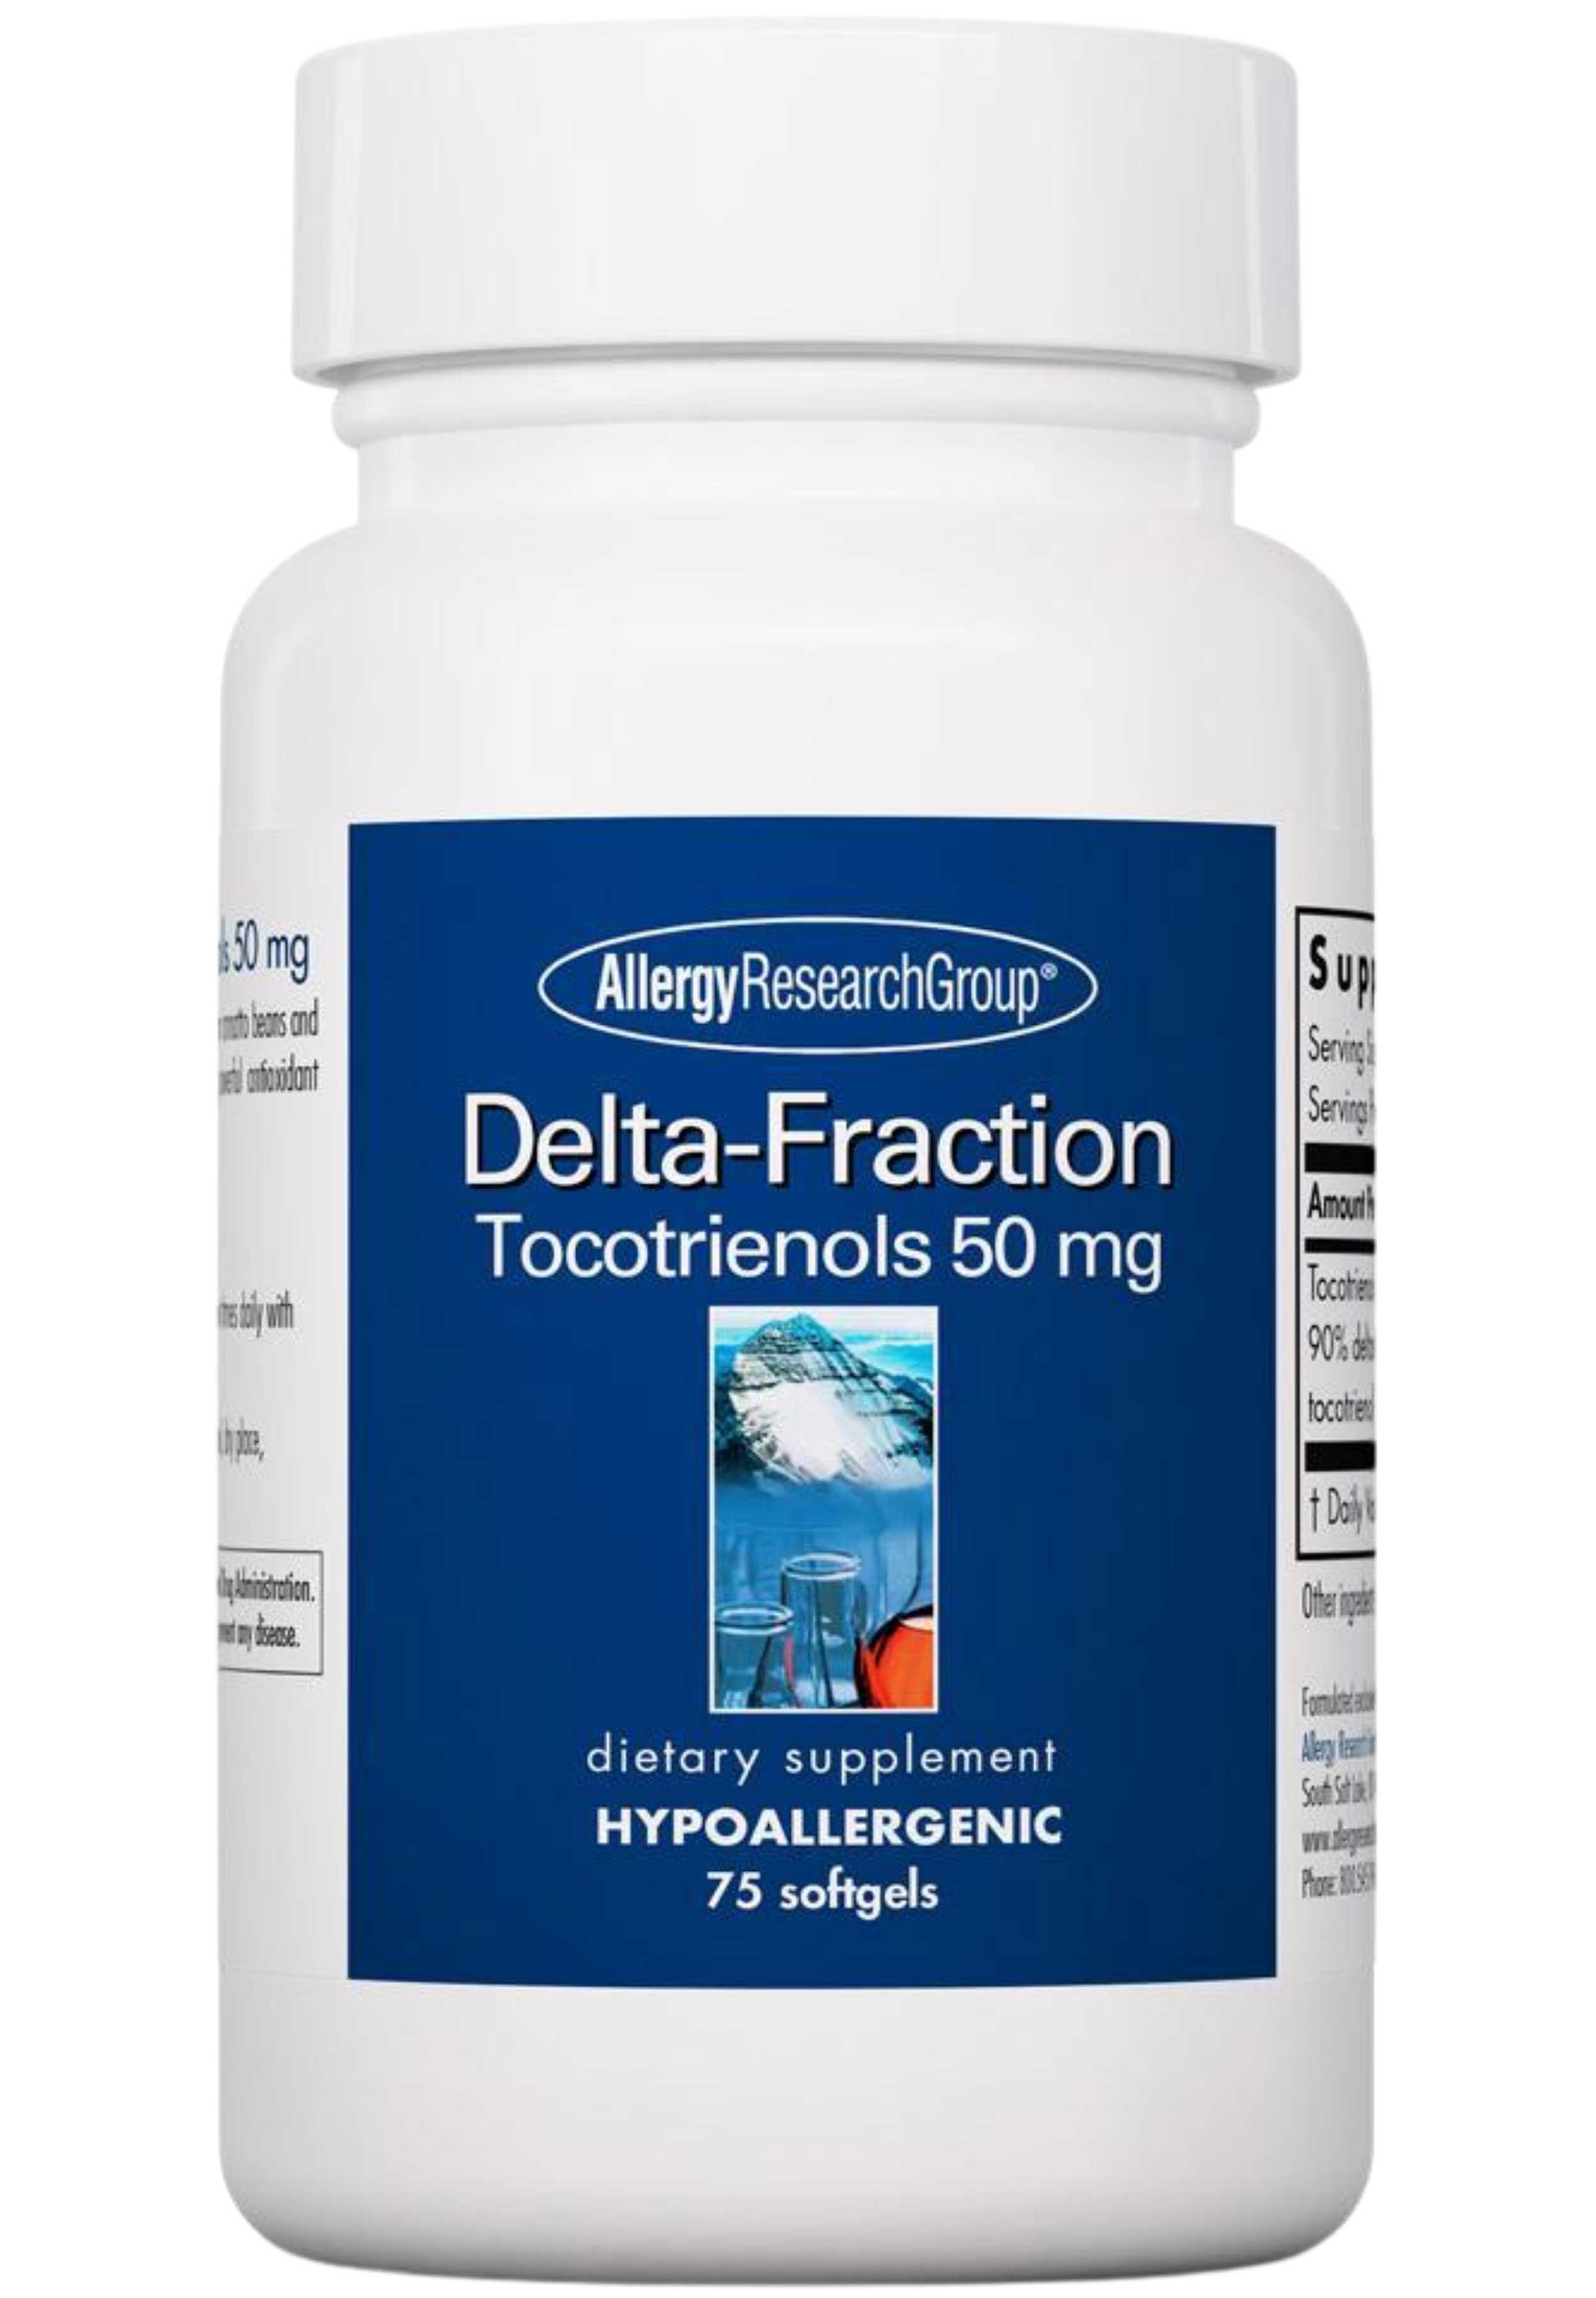 Allergy Research Group Delta-Fraction Tocotrienols